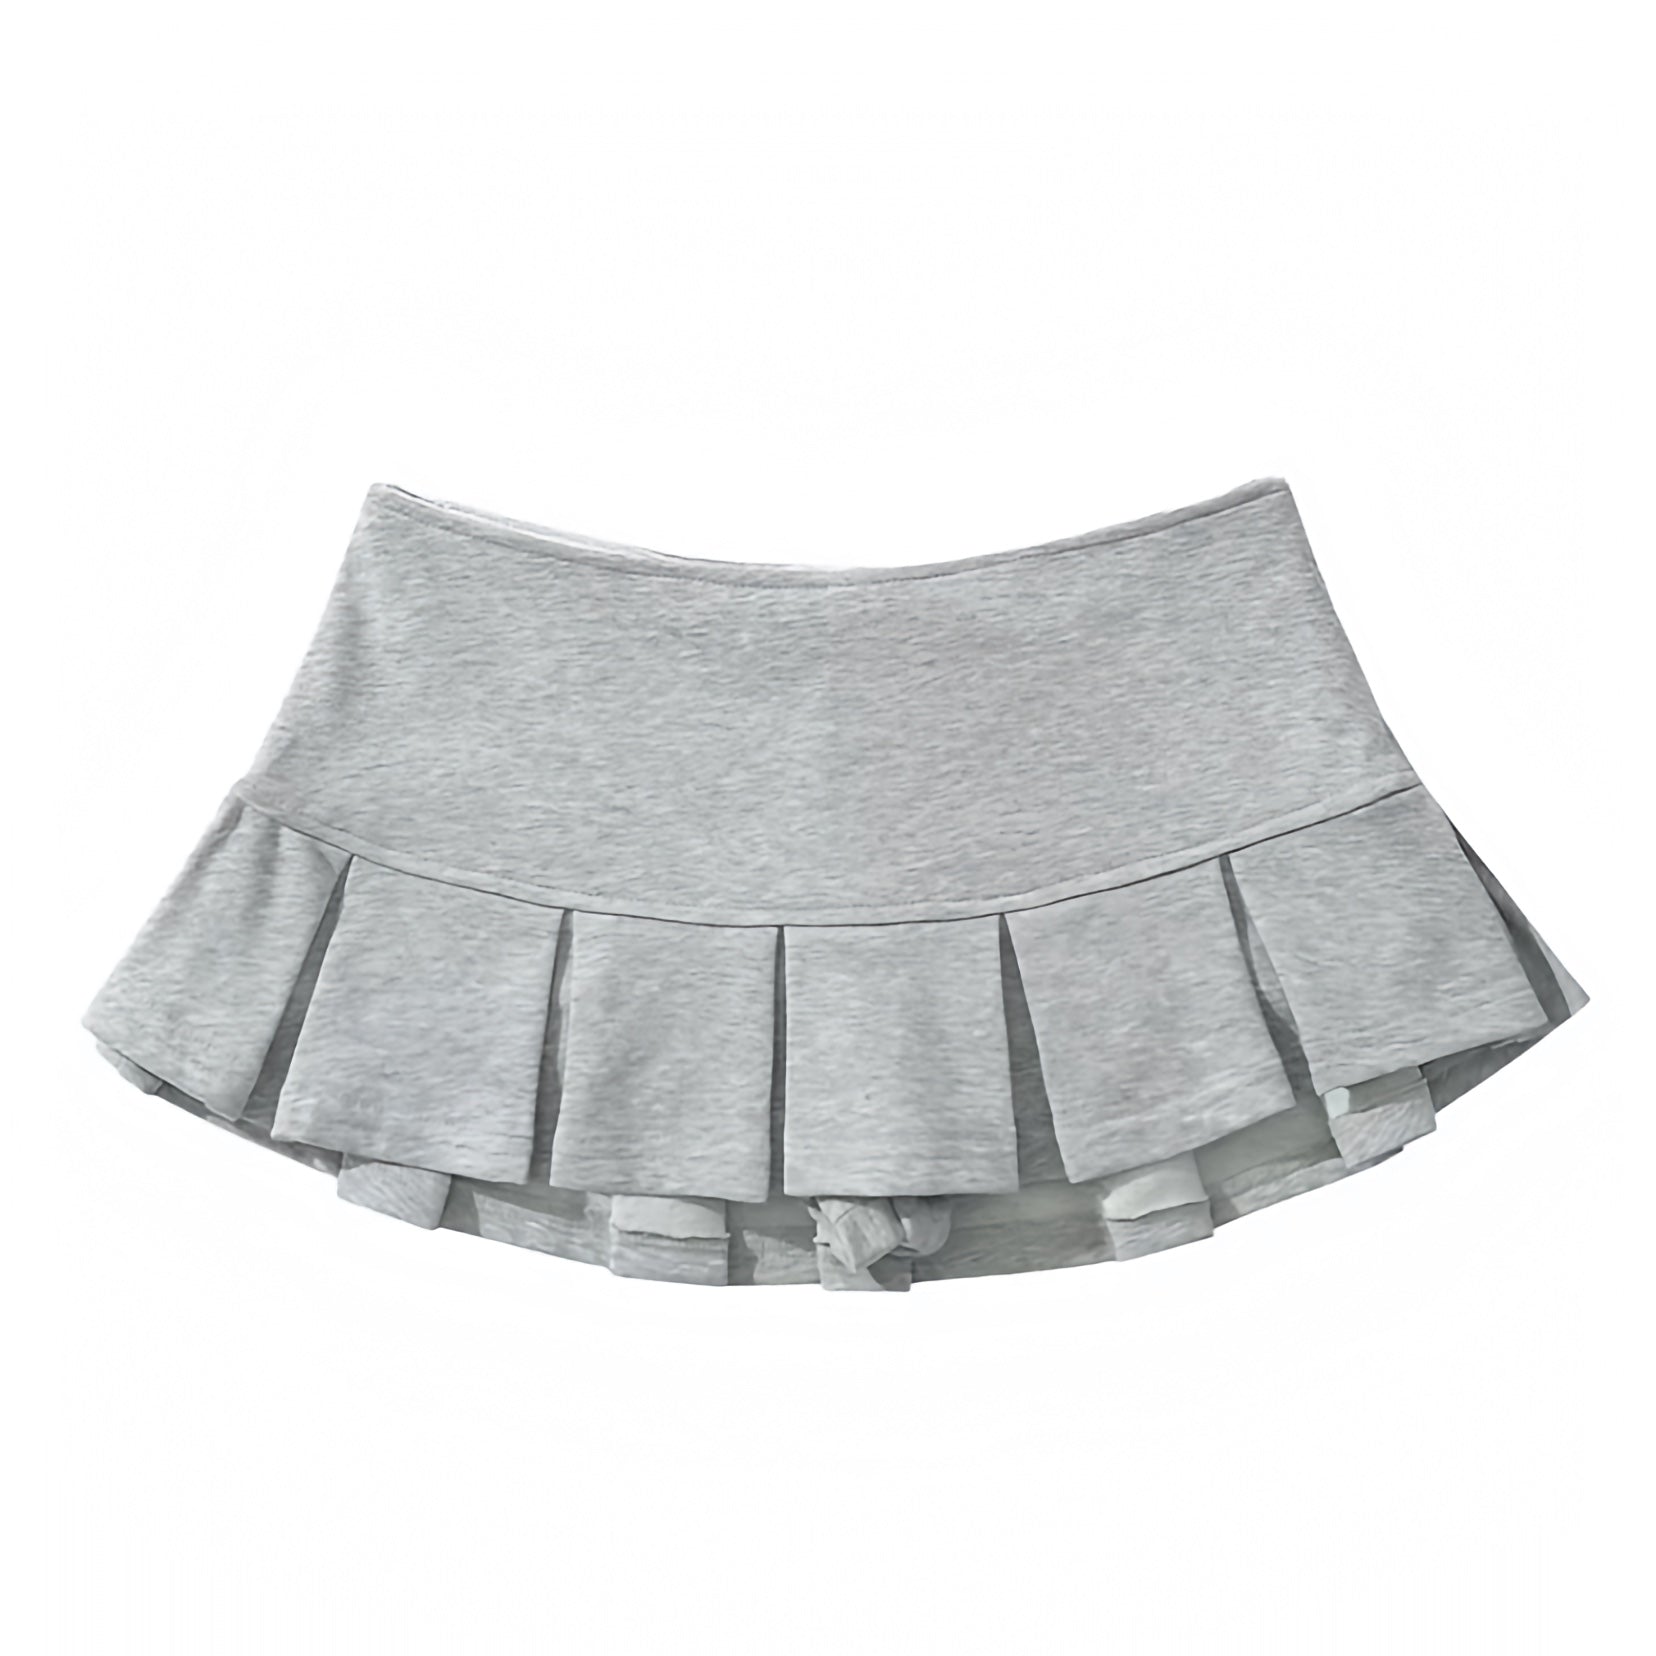 light-heather-grey-gray-slim-fit-pleated-low-rise-waisted-mini-micro-skirt-skort-with-shorts-women-ladies-chic-trendy-spring-2024-summer-casual-feminine-party-date-night-out-sexy-club-wear-y2k-90s-minimalist-office-siren-style-zara-revolve-aritzia-white-fox-princess-polly-babyboo-edikted-jaded-london-brandy-melville-iamgia-areyouami